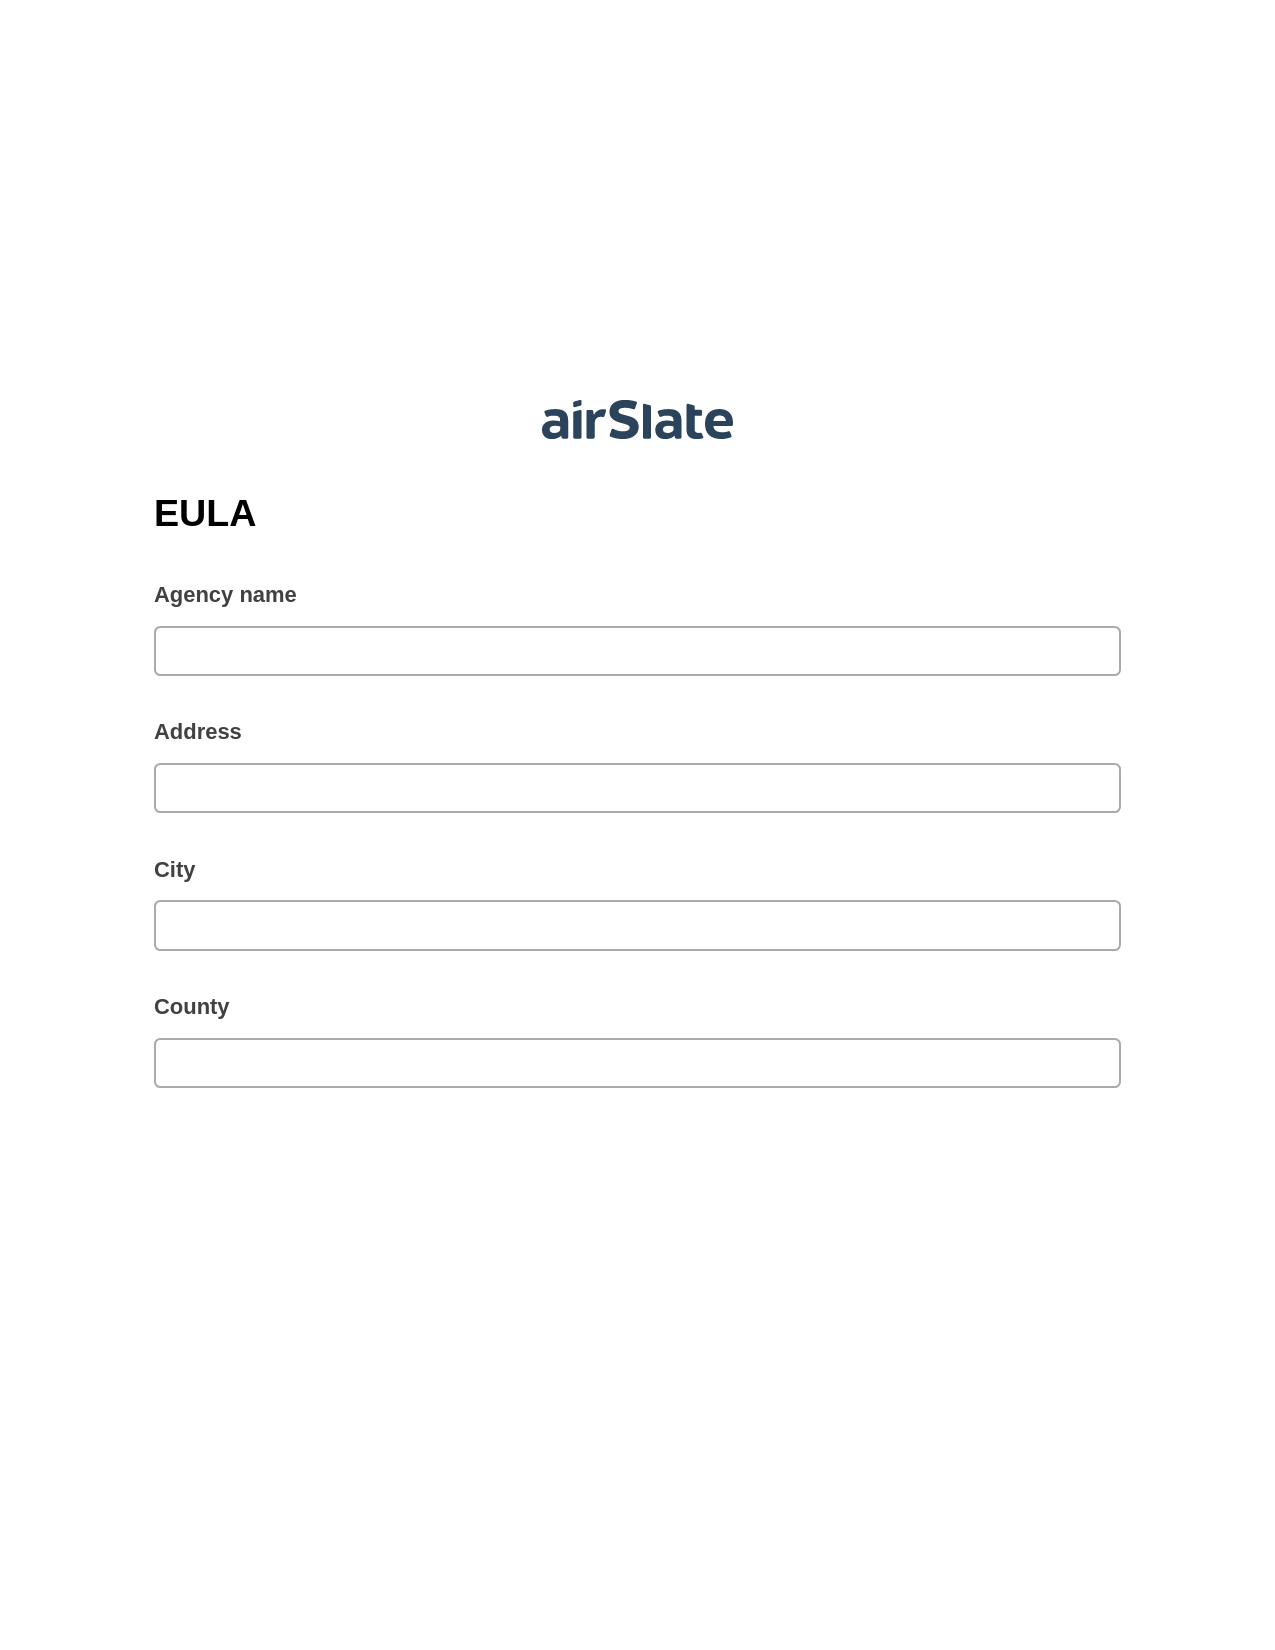 EULA Pre-fill Slate from MS Dynamics 365 Records Bot, Send a Slate to Salesforce Contact Bot, Export to Smartsheet